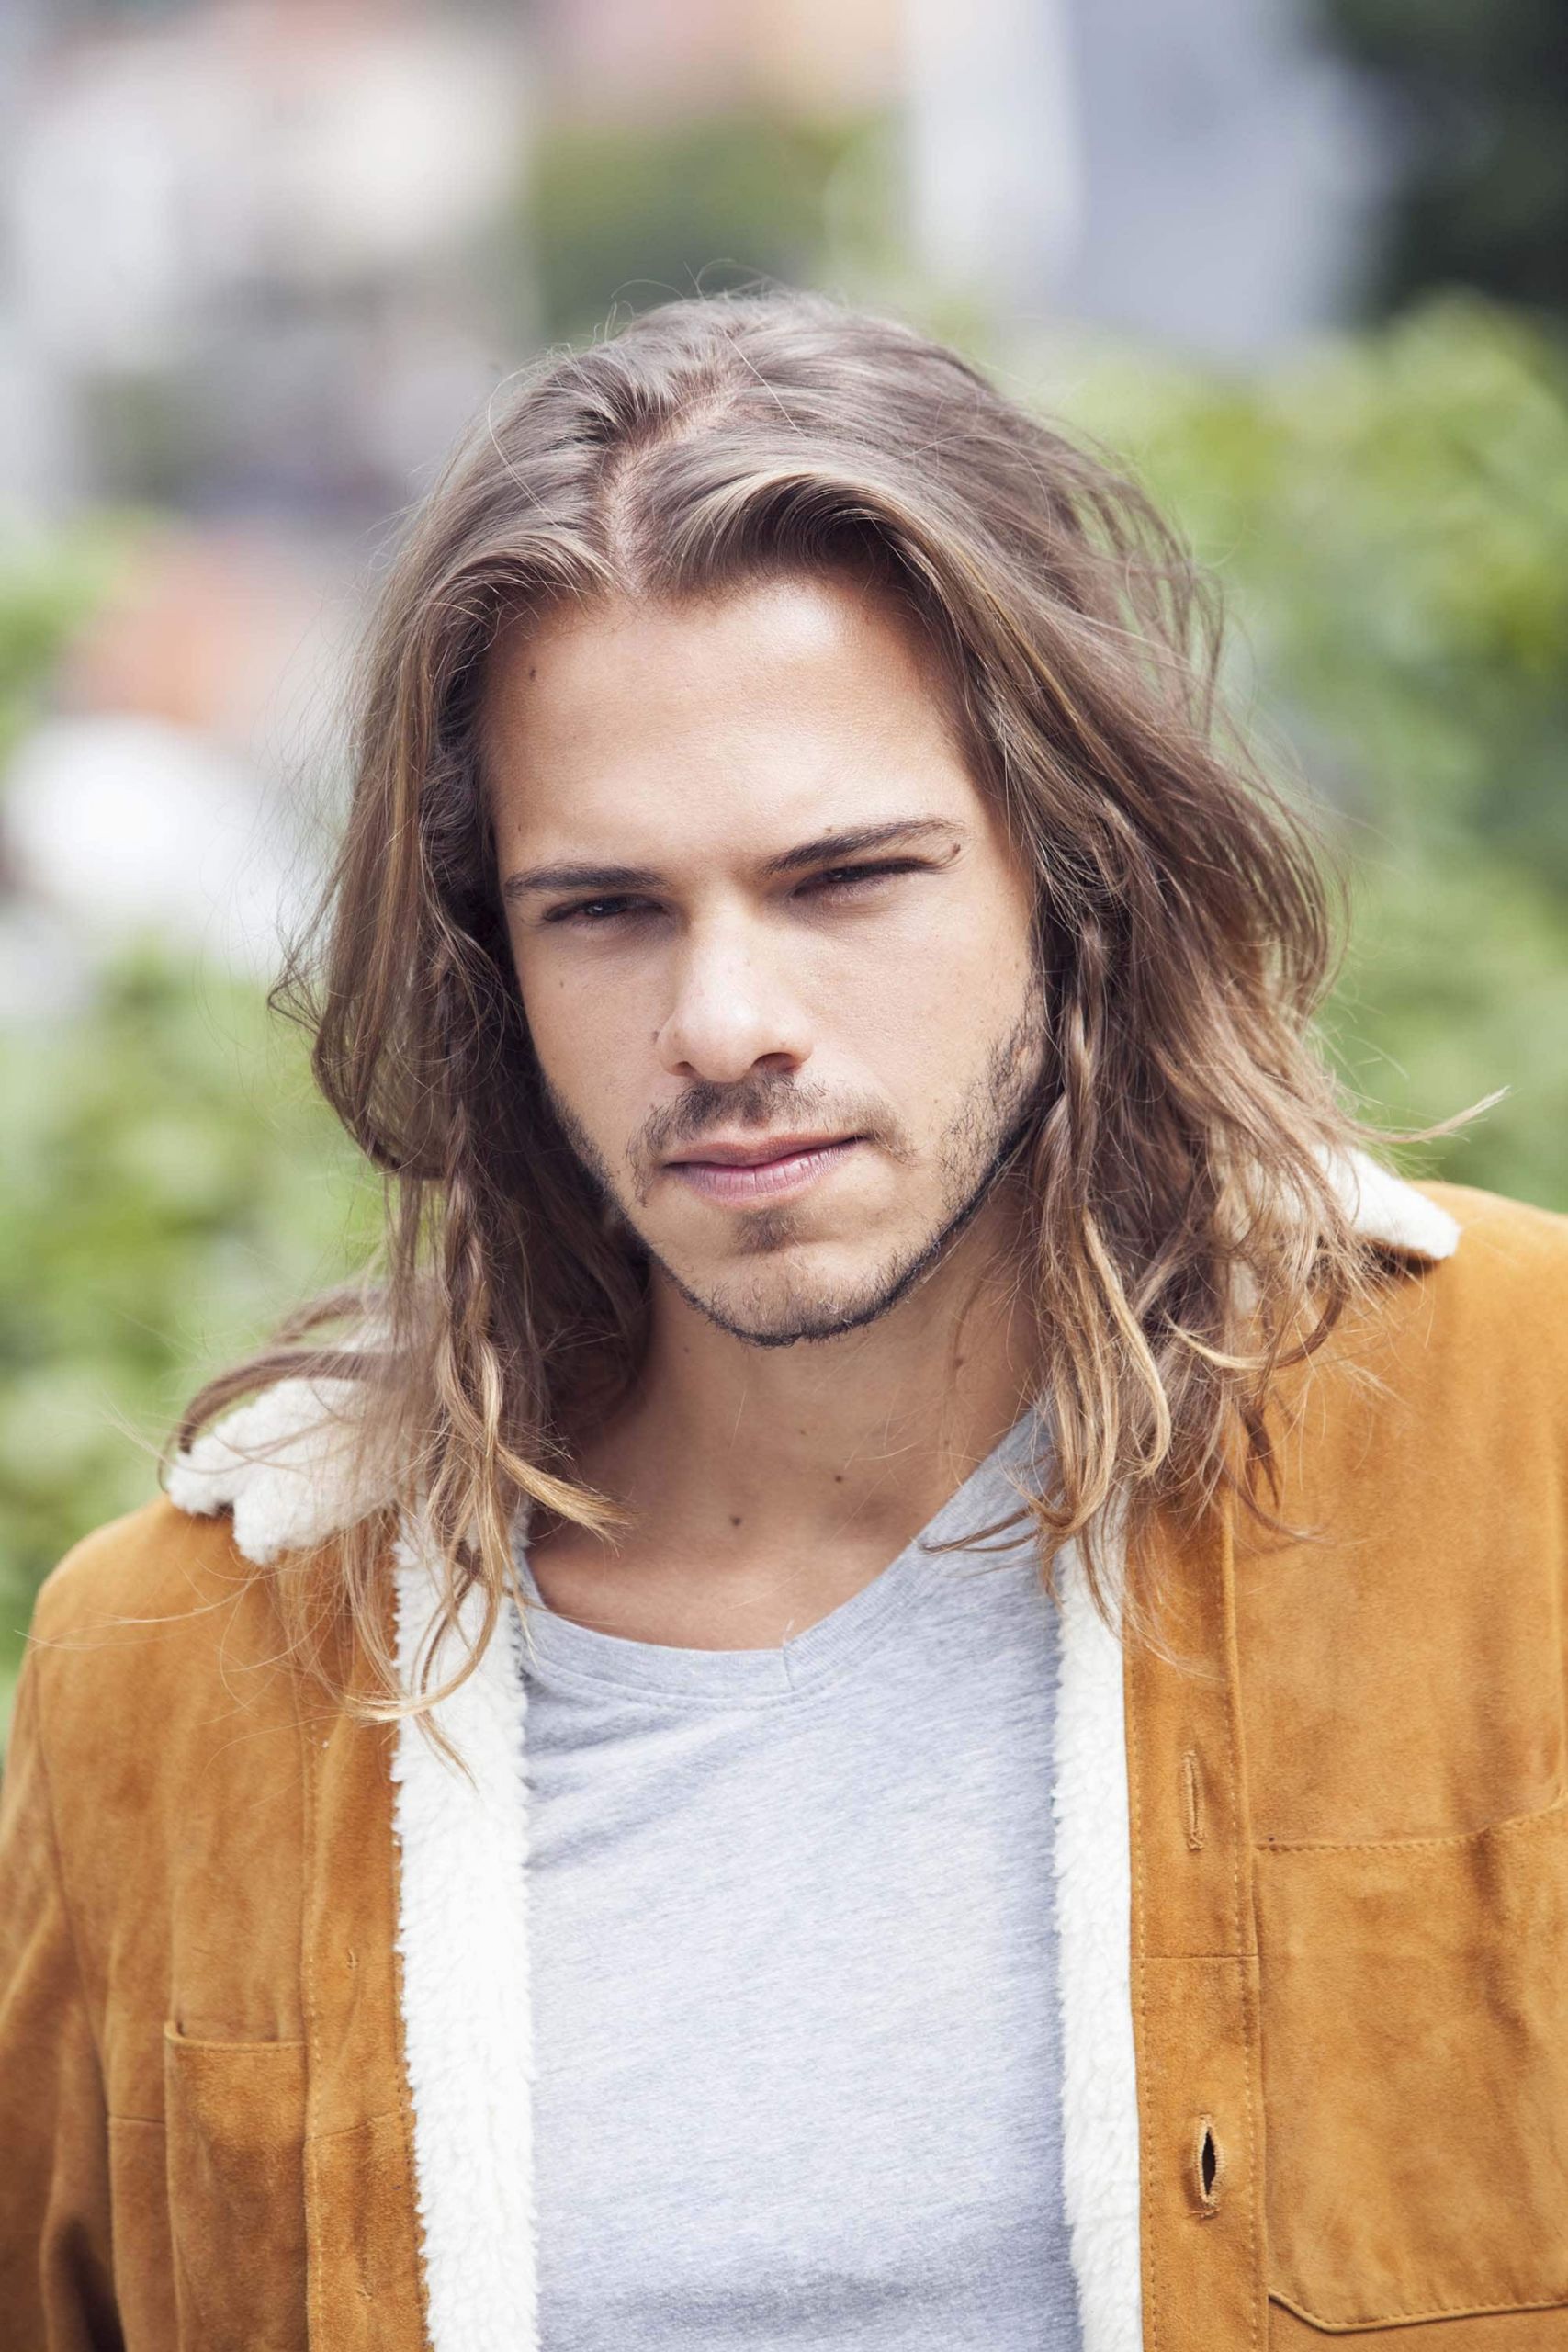 Long Mens Hairstyles
 Edgy long hairstyles men can pull off